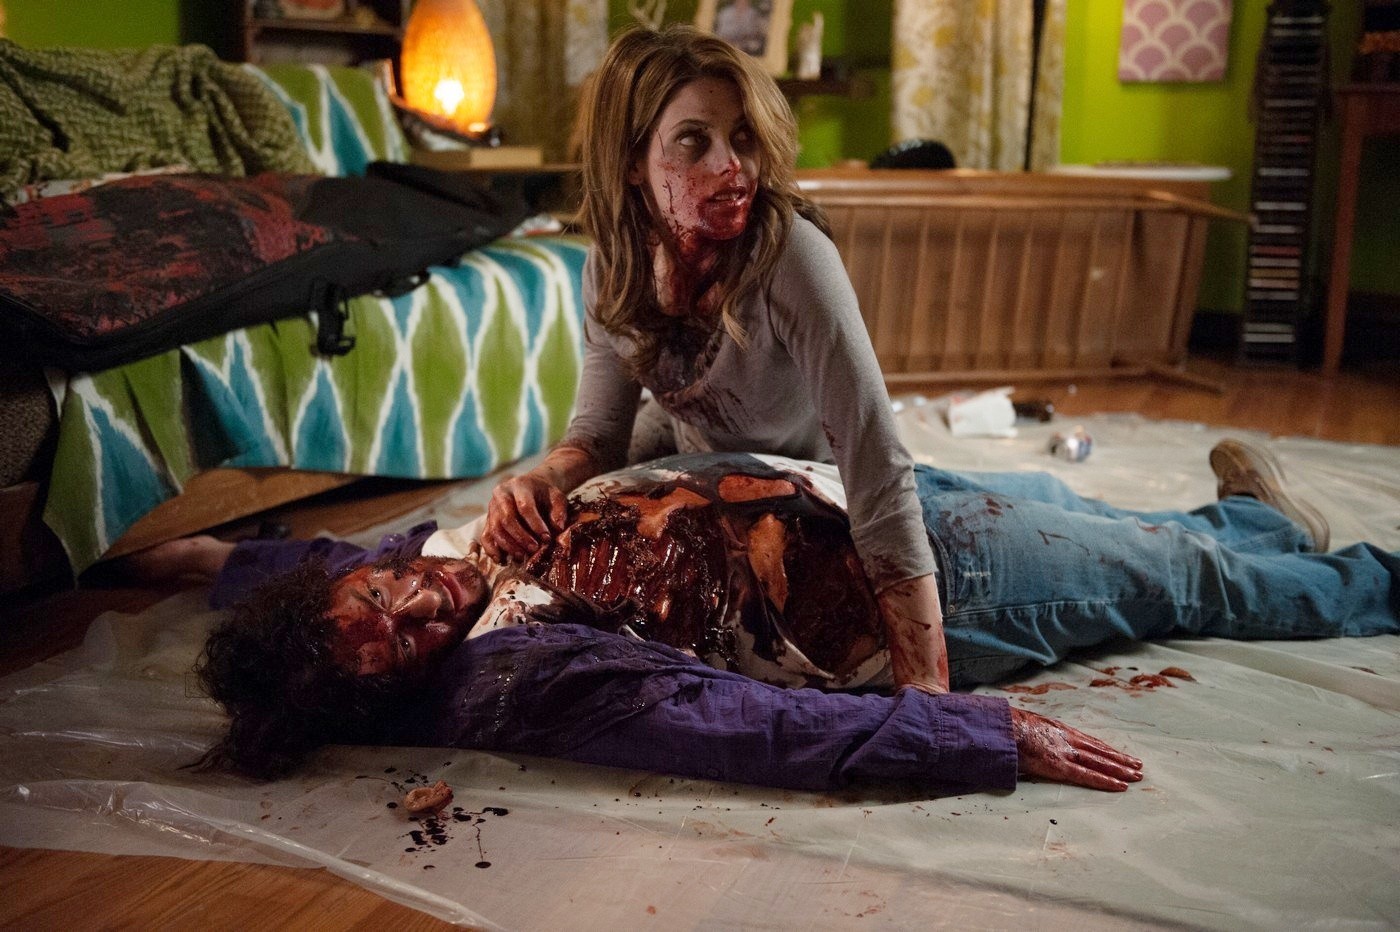 Ashley Greene stars as Evelyn in Image Entertainment's Burying the Ex (2015)